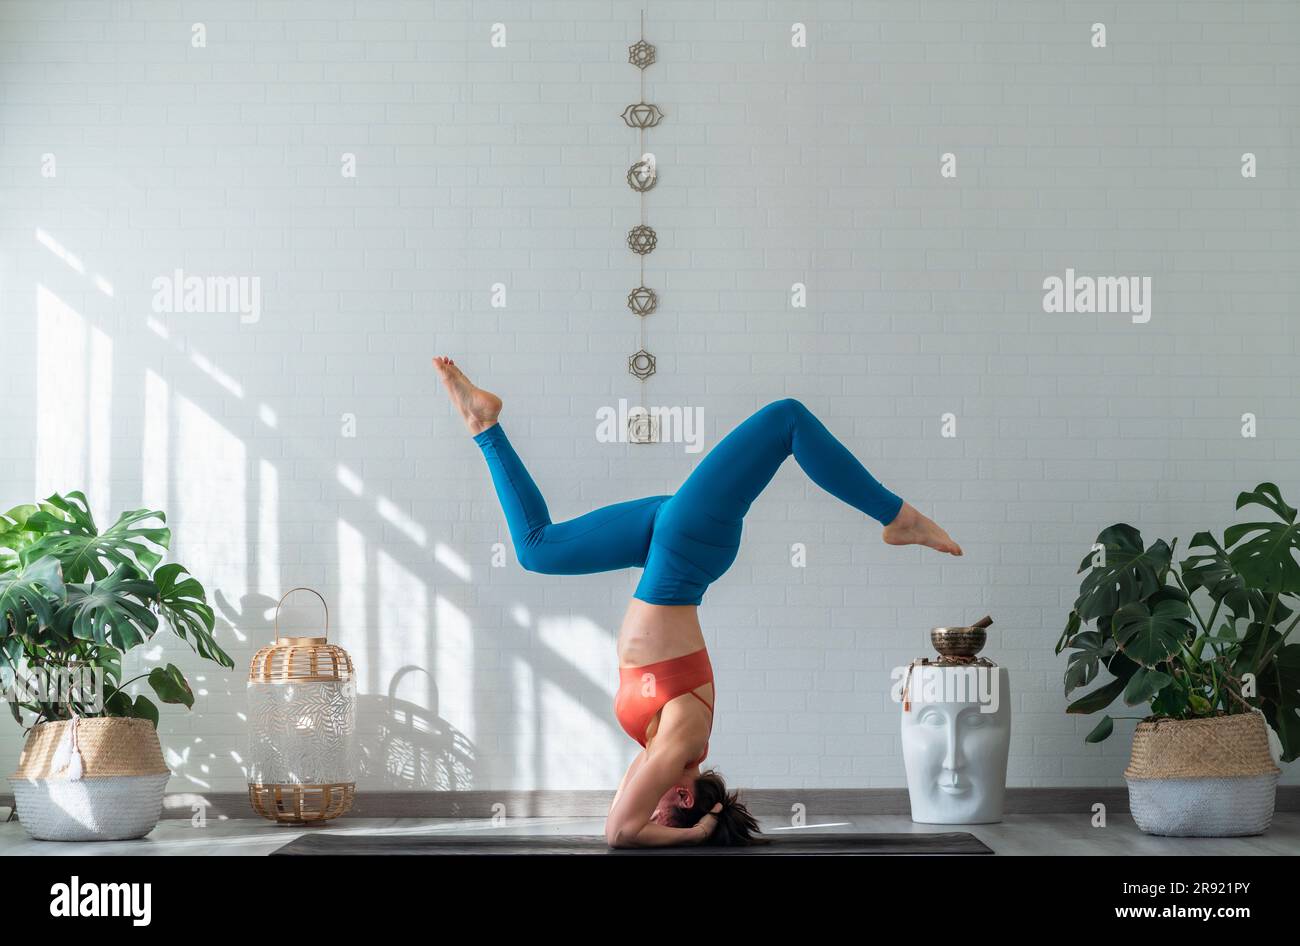 Woman doing supported headstand pose in front of wall Stock Photo